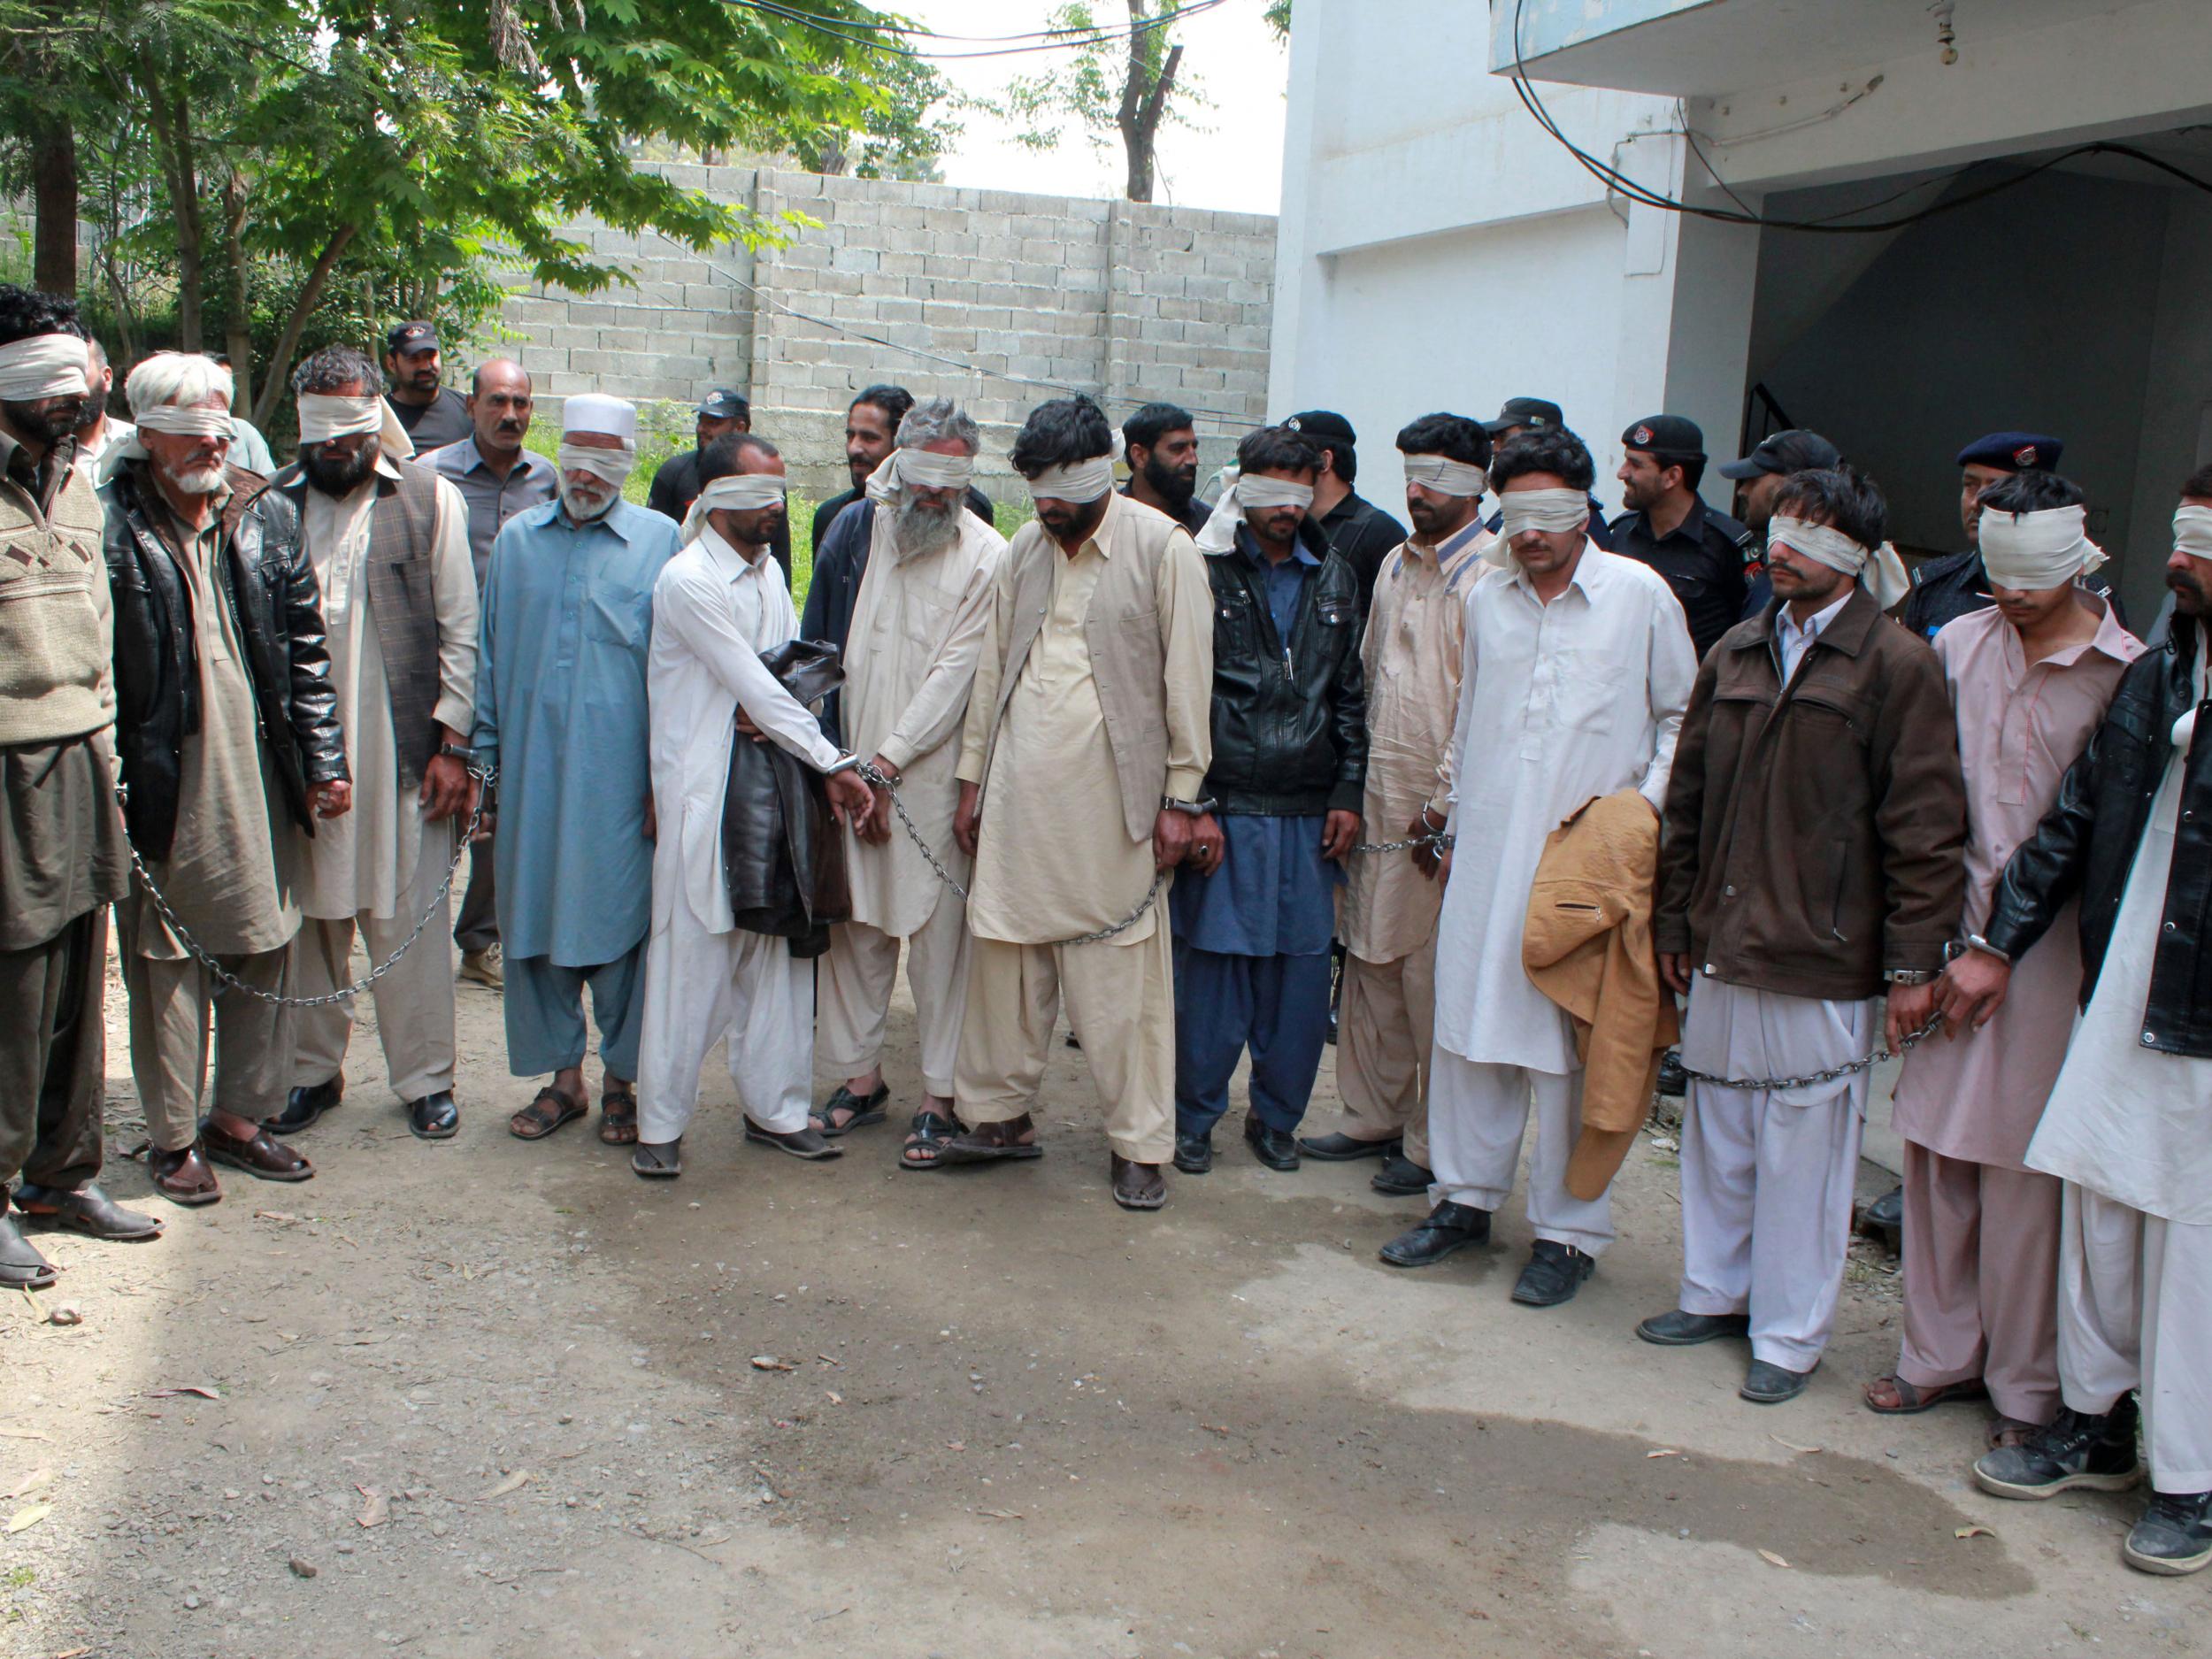 Members of a tribal council accused of ordering the burning death of a 16-year-old girl are shown to the media after they were arrested by police in Abbottabad, Pakistan